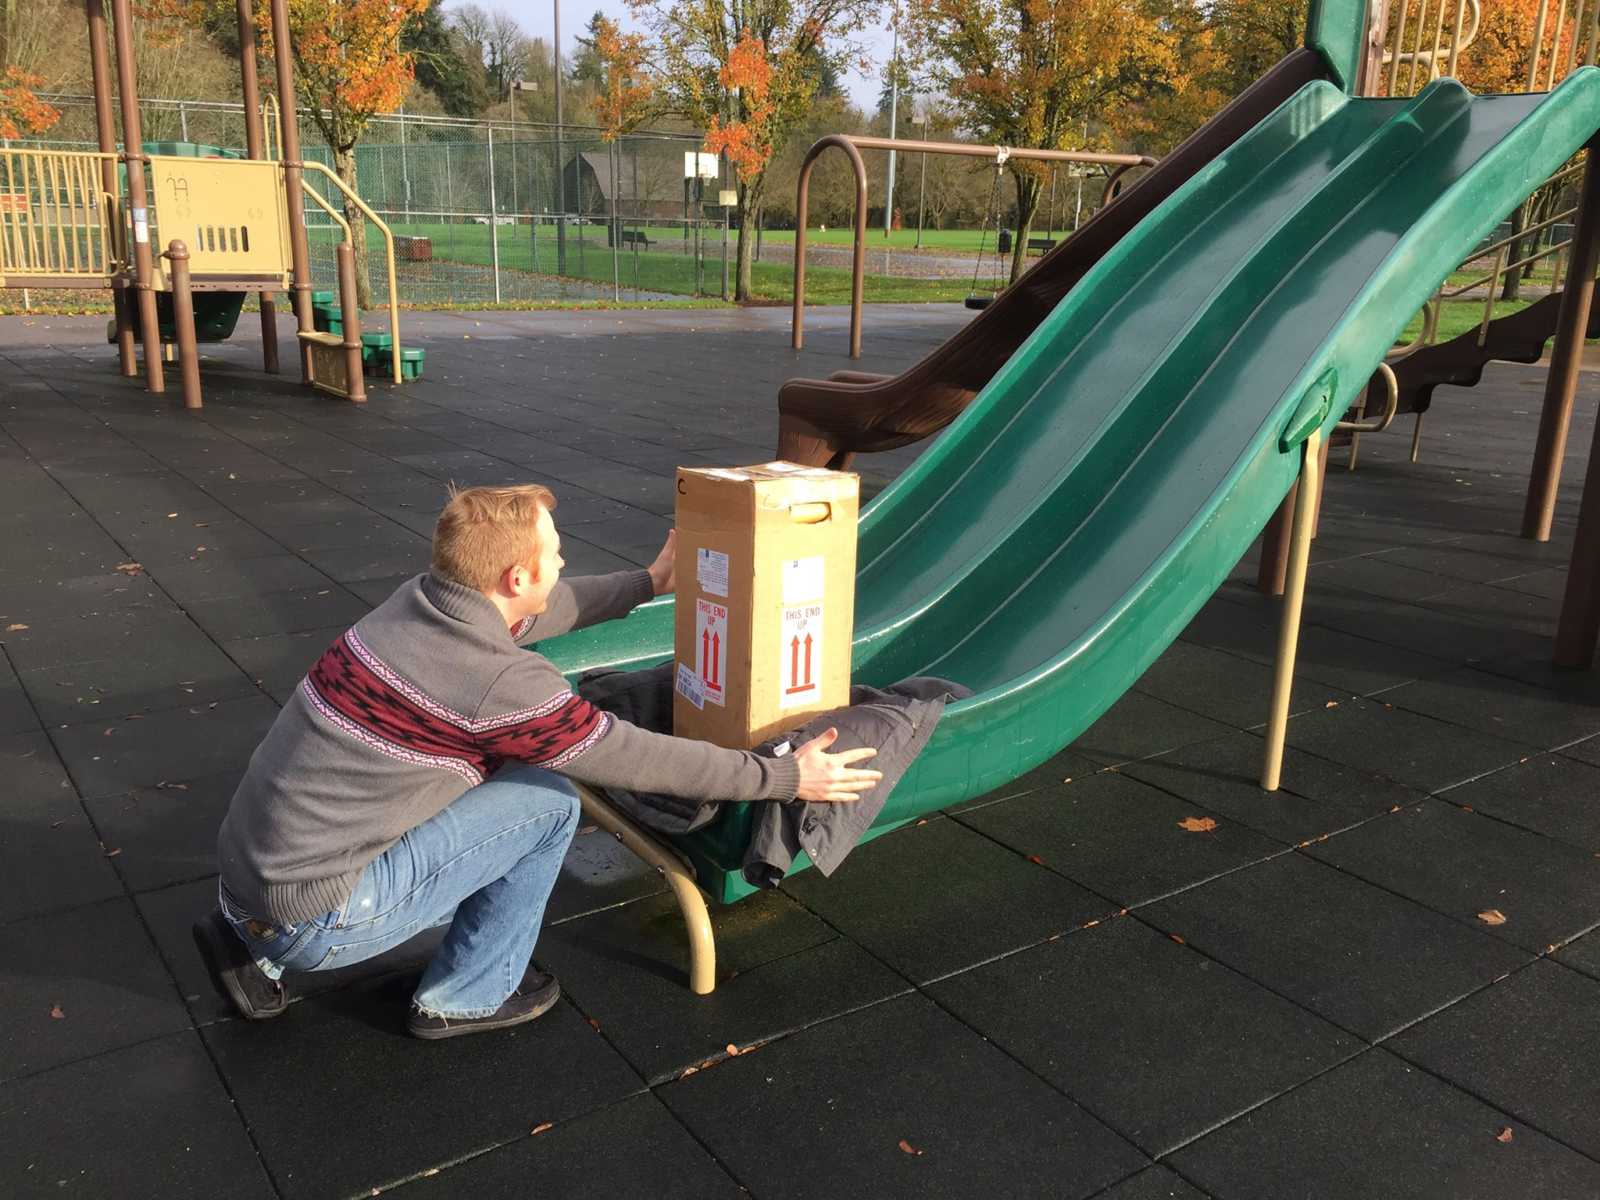 shipment box of embryos placed on a slide while a man crouches down at the end of the slide ready to catch it